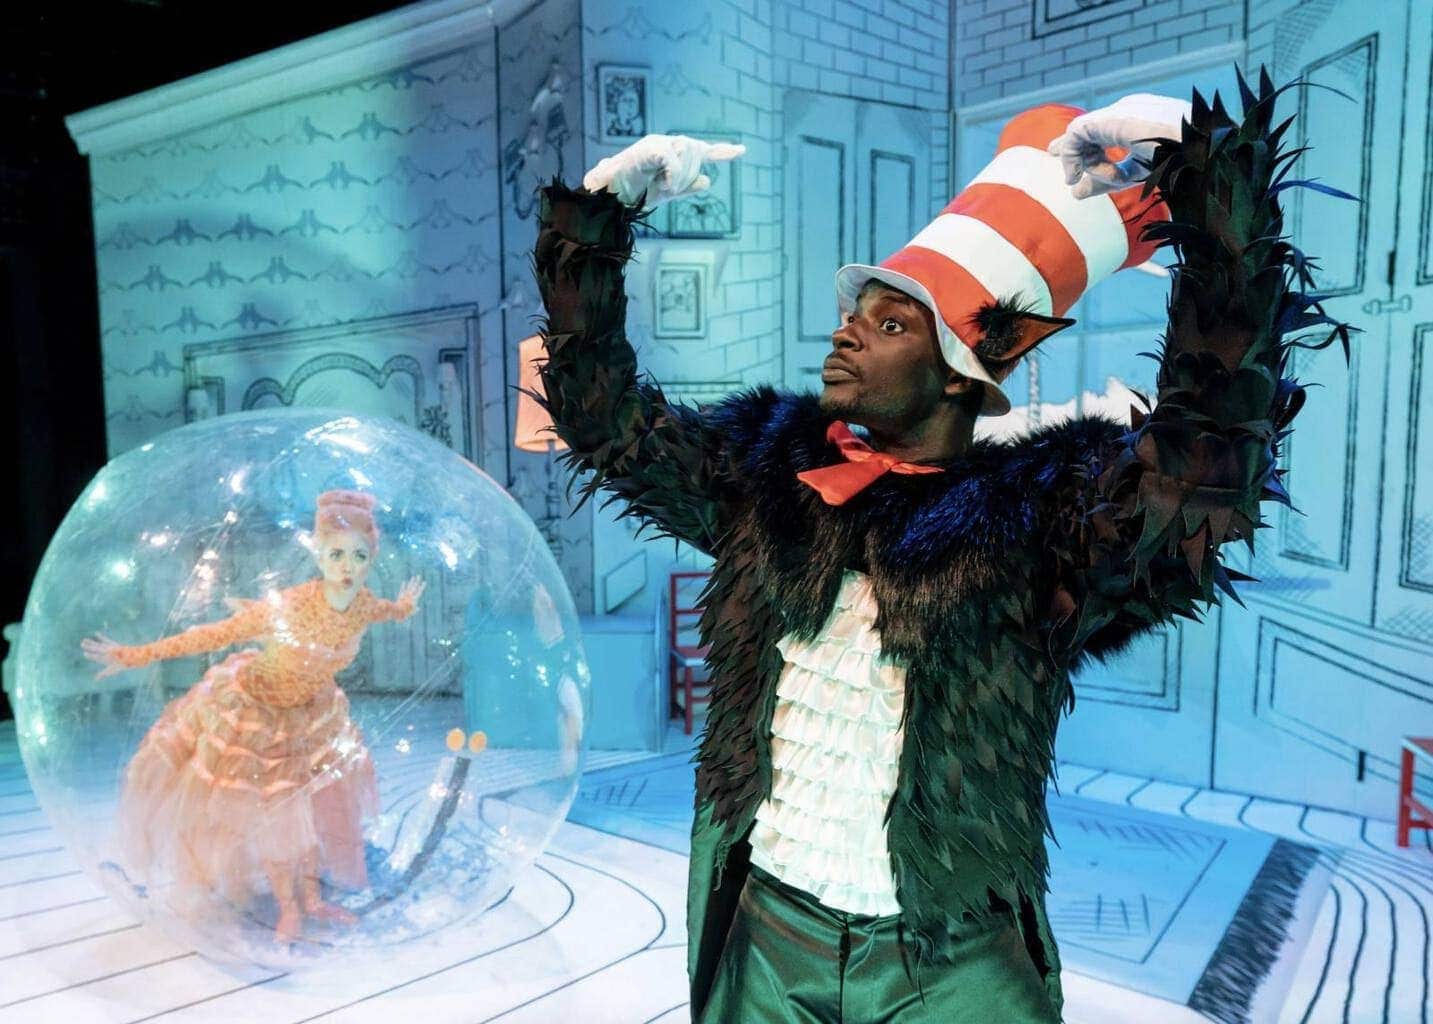 Review of The Cat in the Hat | Rose Theatre Kingston